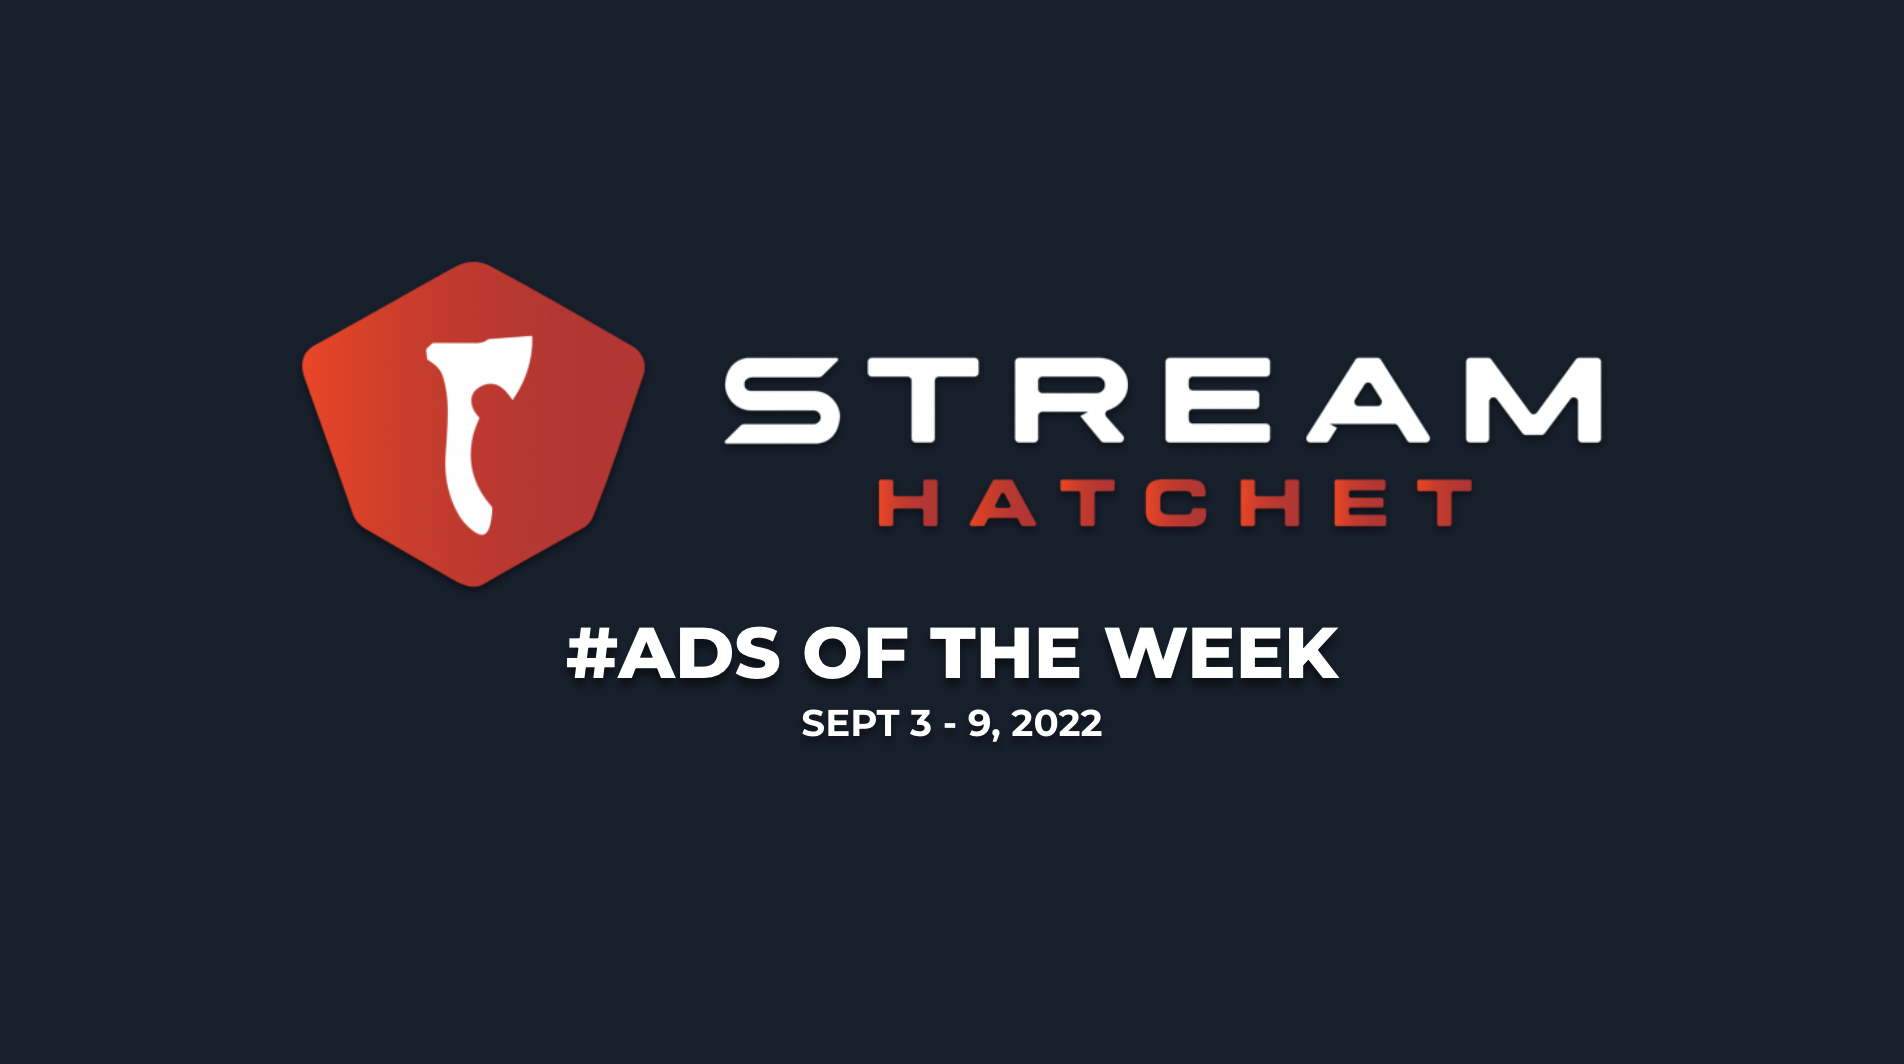 live streaming ads of the week from stream hatchet from september 3 to 9